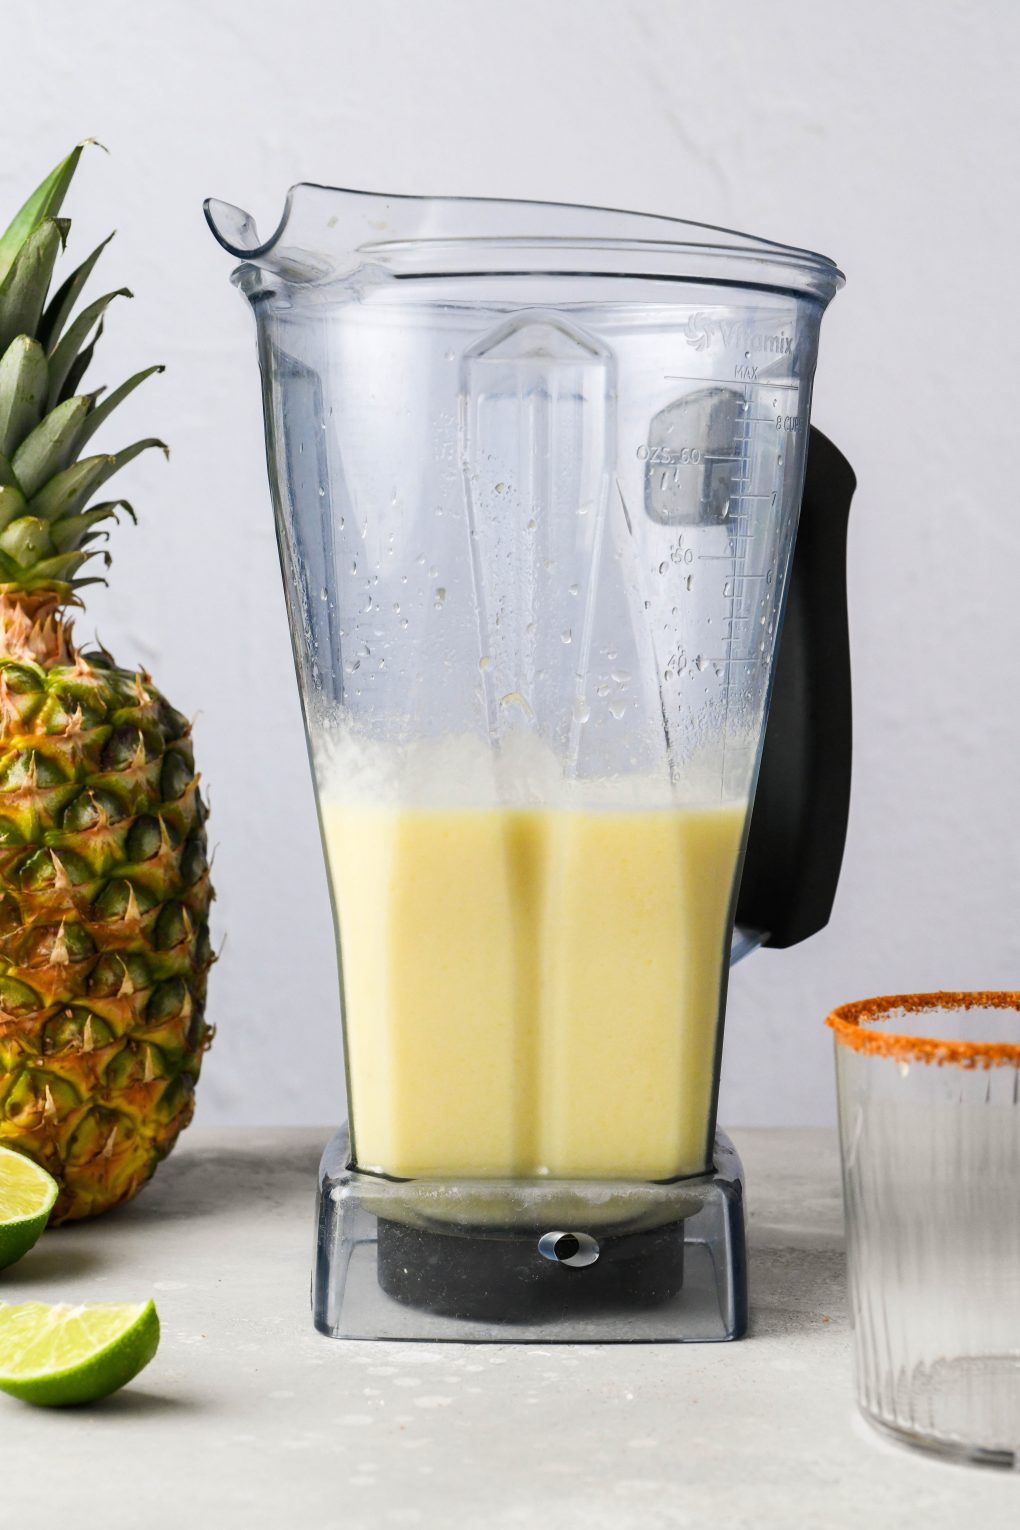 Straight on image of frozen pineapple margaritas, in a blender container - on a light colored background next to a fresh pineapple and a bottle of milagro silver tequila.